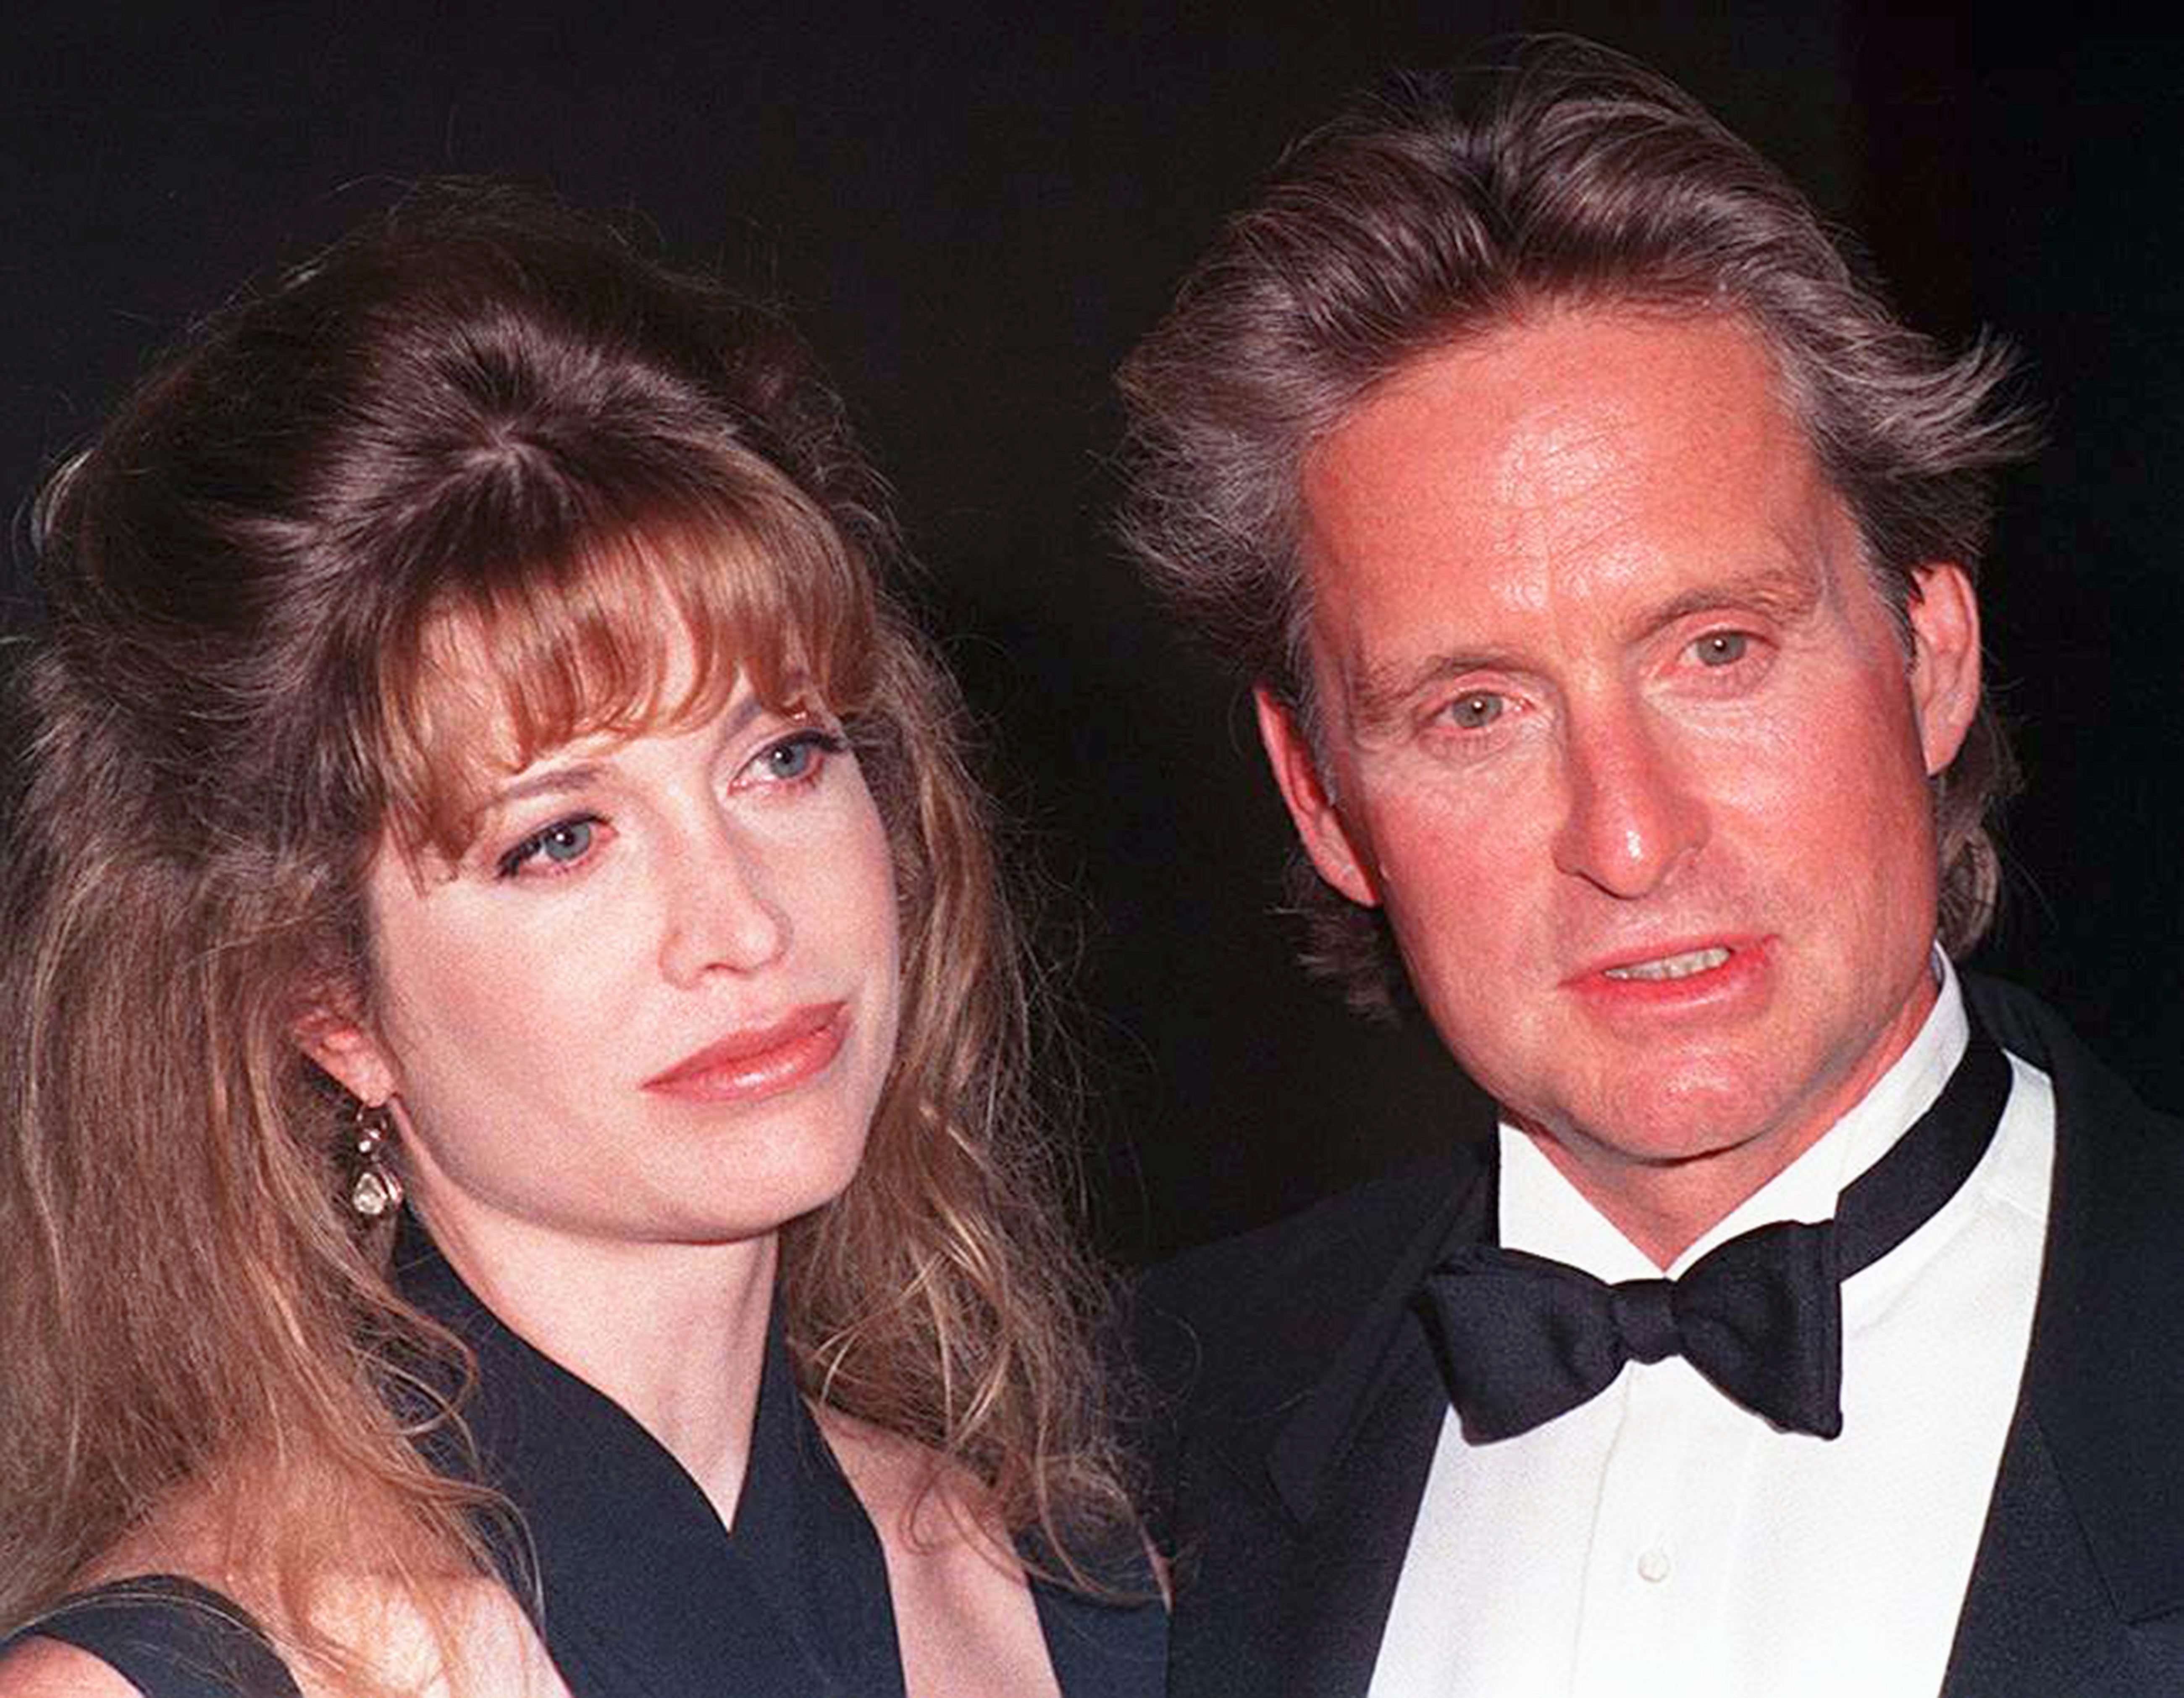 Michael Douglas with his wife Diandra at the American Cinematheque's Eighth Annual Moving Picture Ball in Los Angeles, California, on September 29, 1993. | Source: Getty Images.